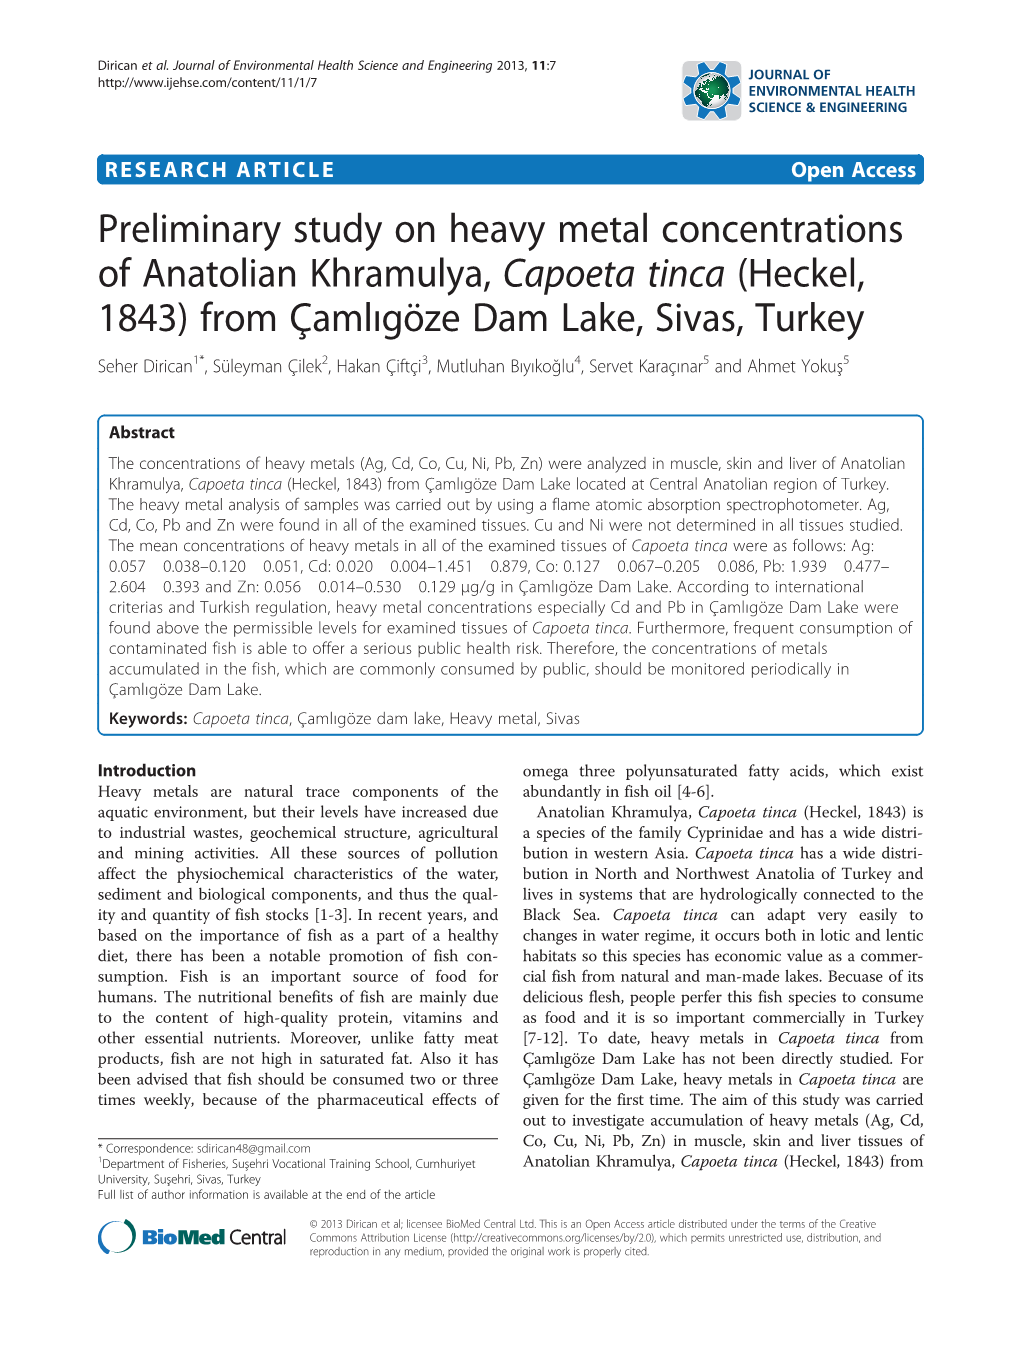 Preliminary Study on Heavy Metal Concentrations of Anatolian